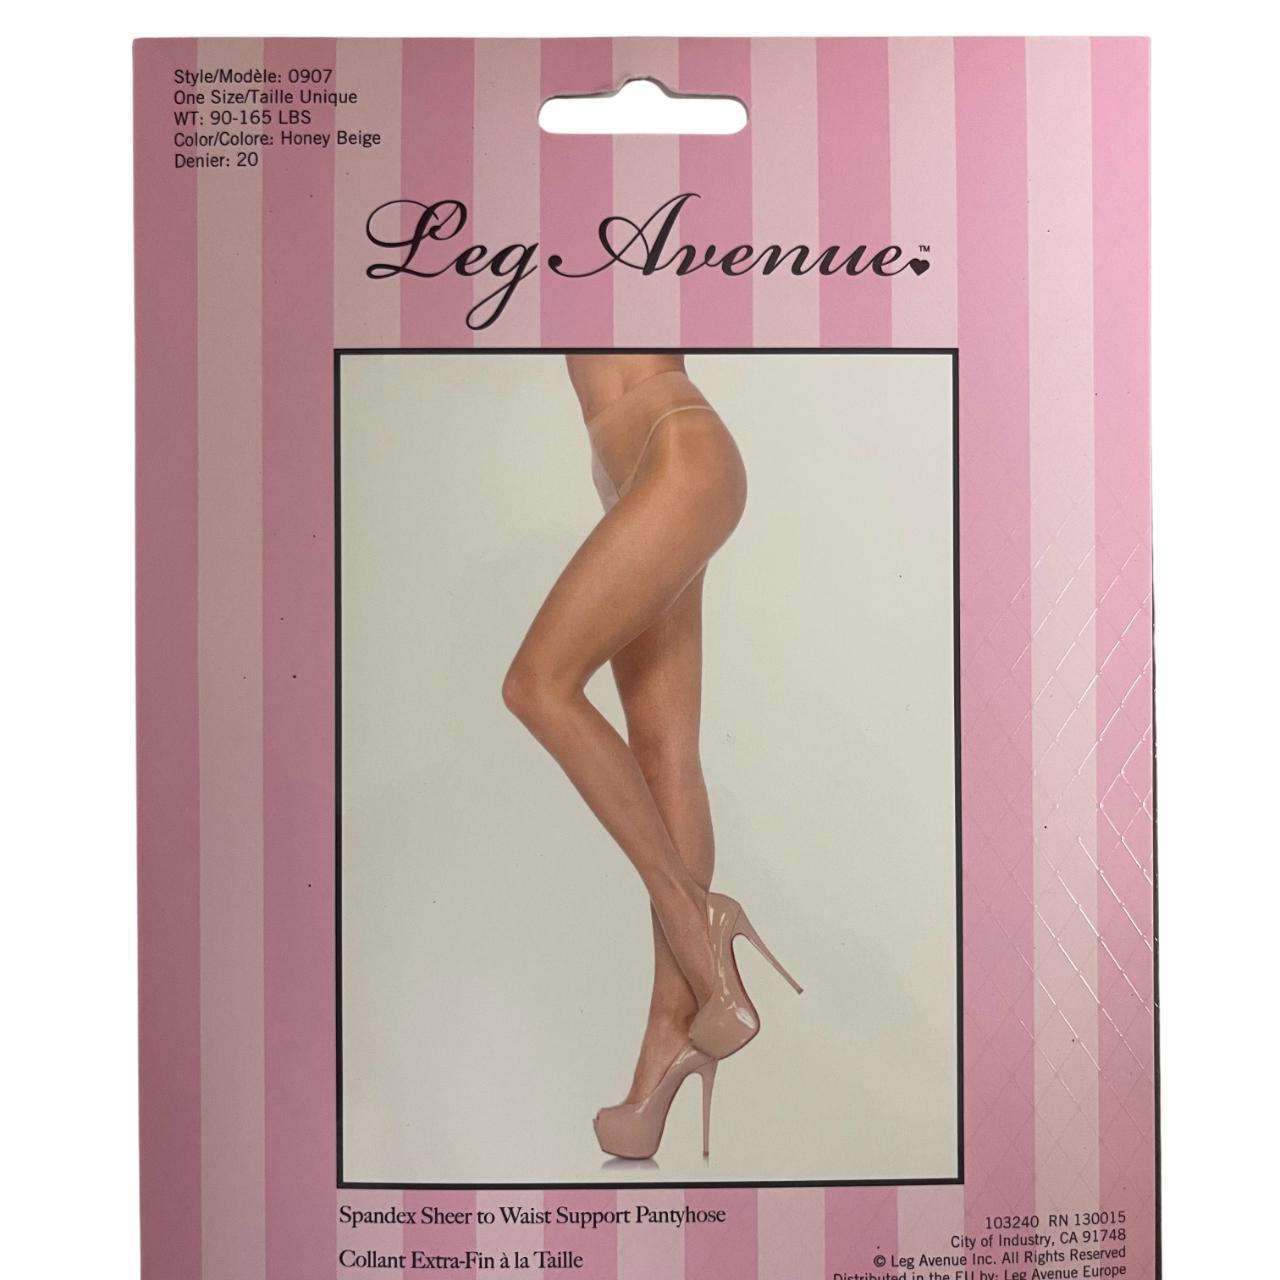 Spandex Sheer to Waist Support Pantyhose from Leg Avenue